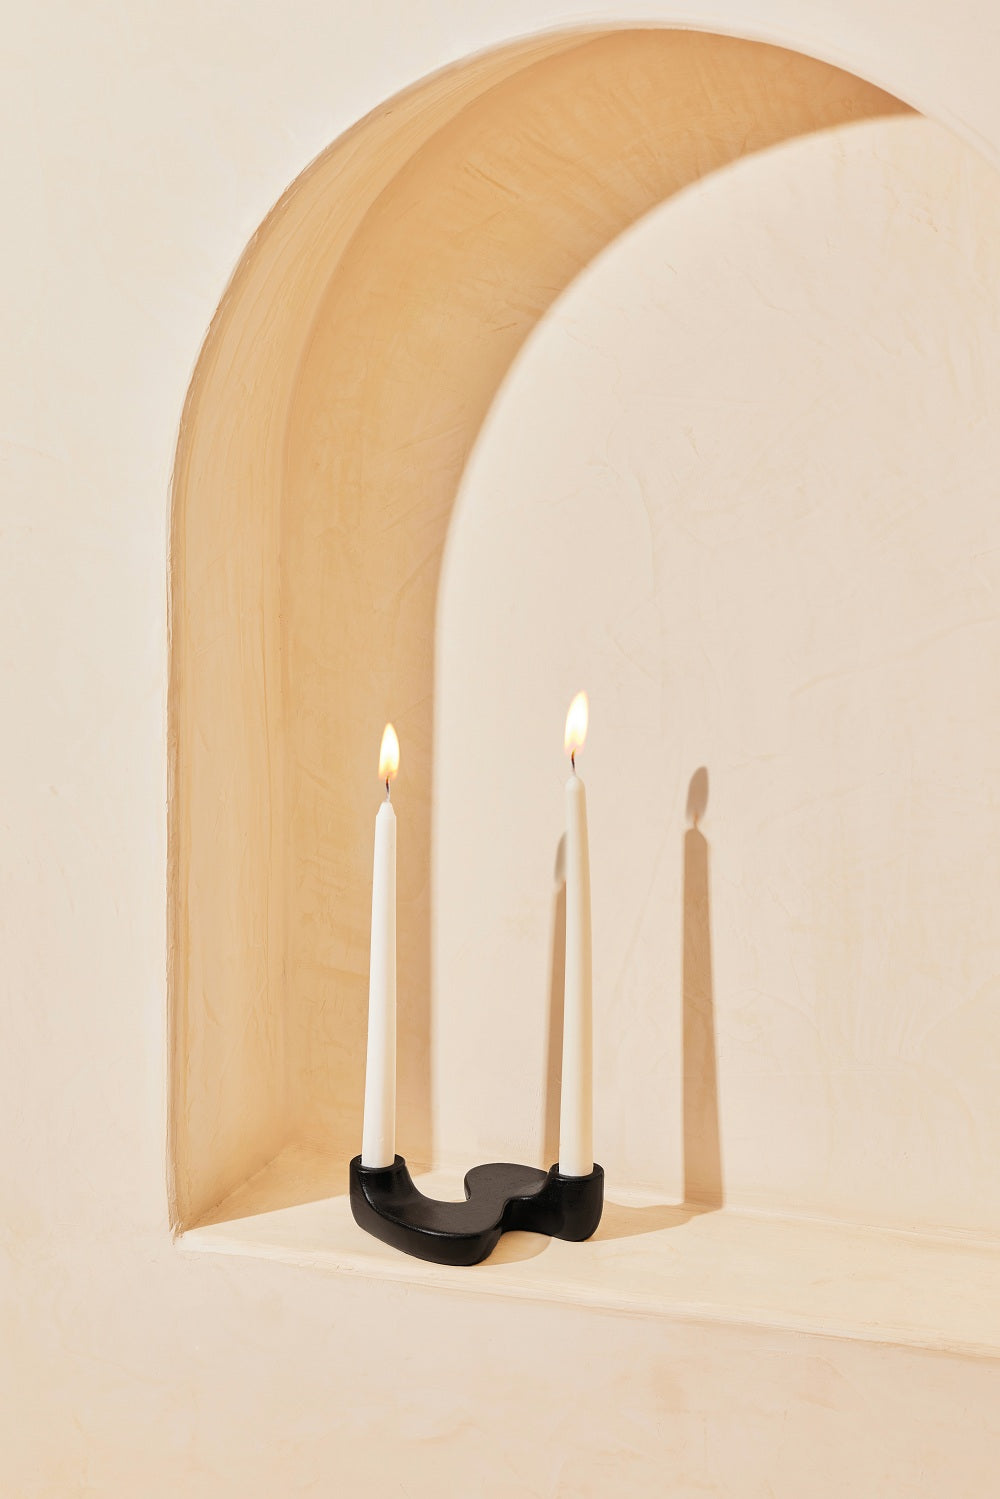 "S" Style Nordic Concrete Candle Holder - Black (Set of 2)